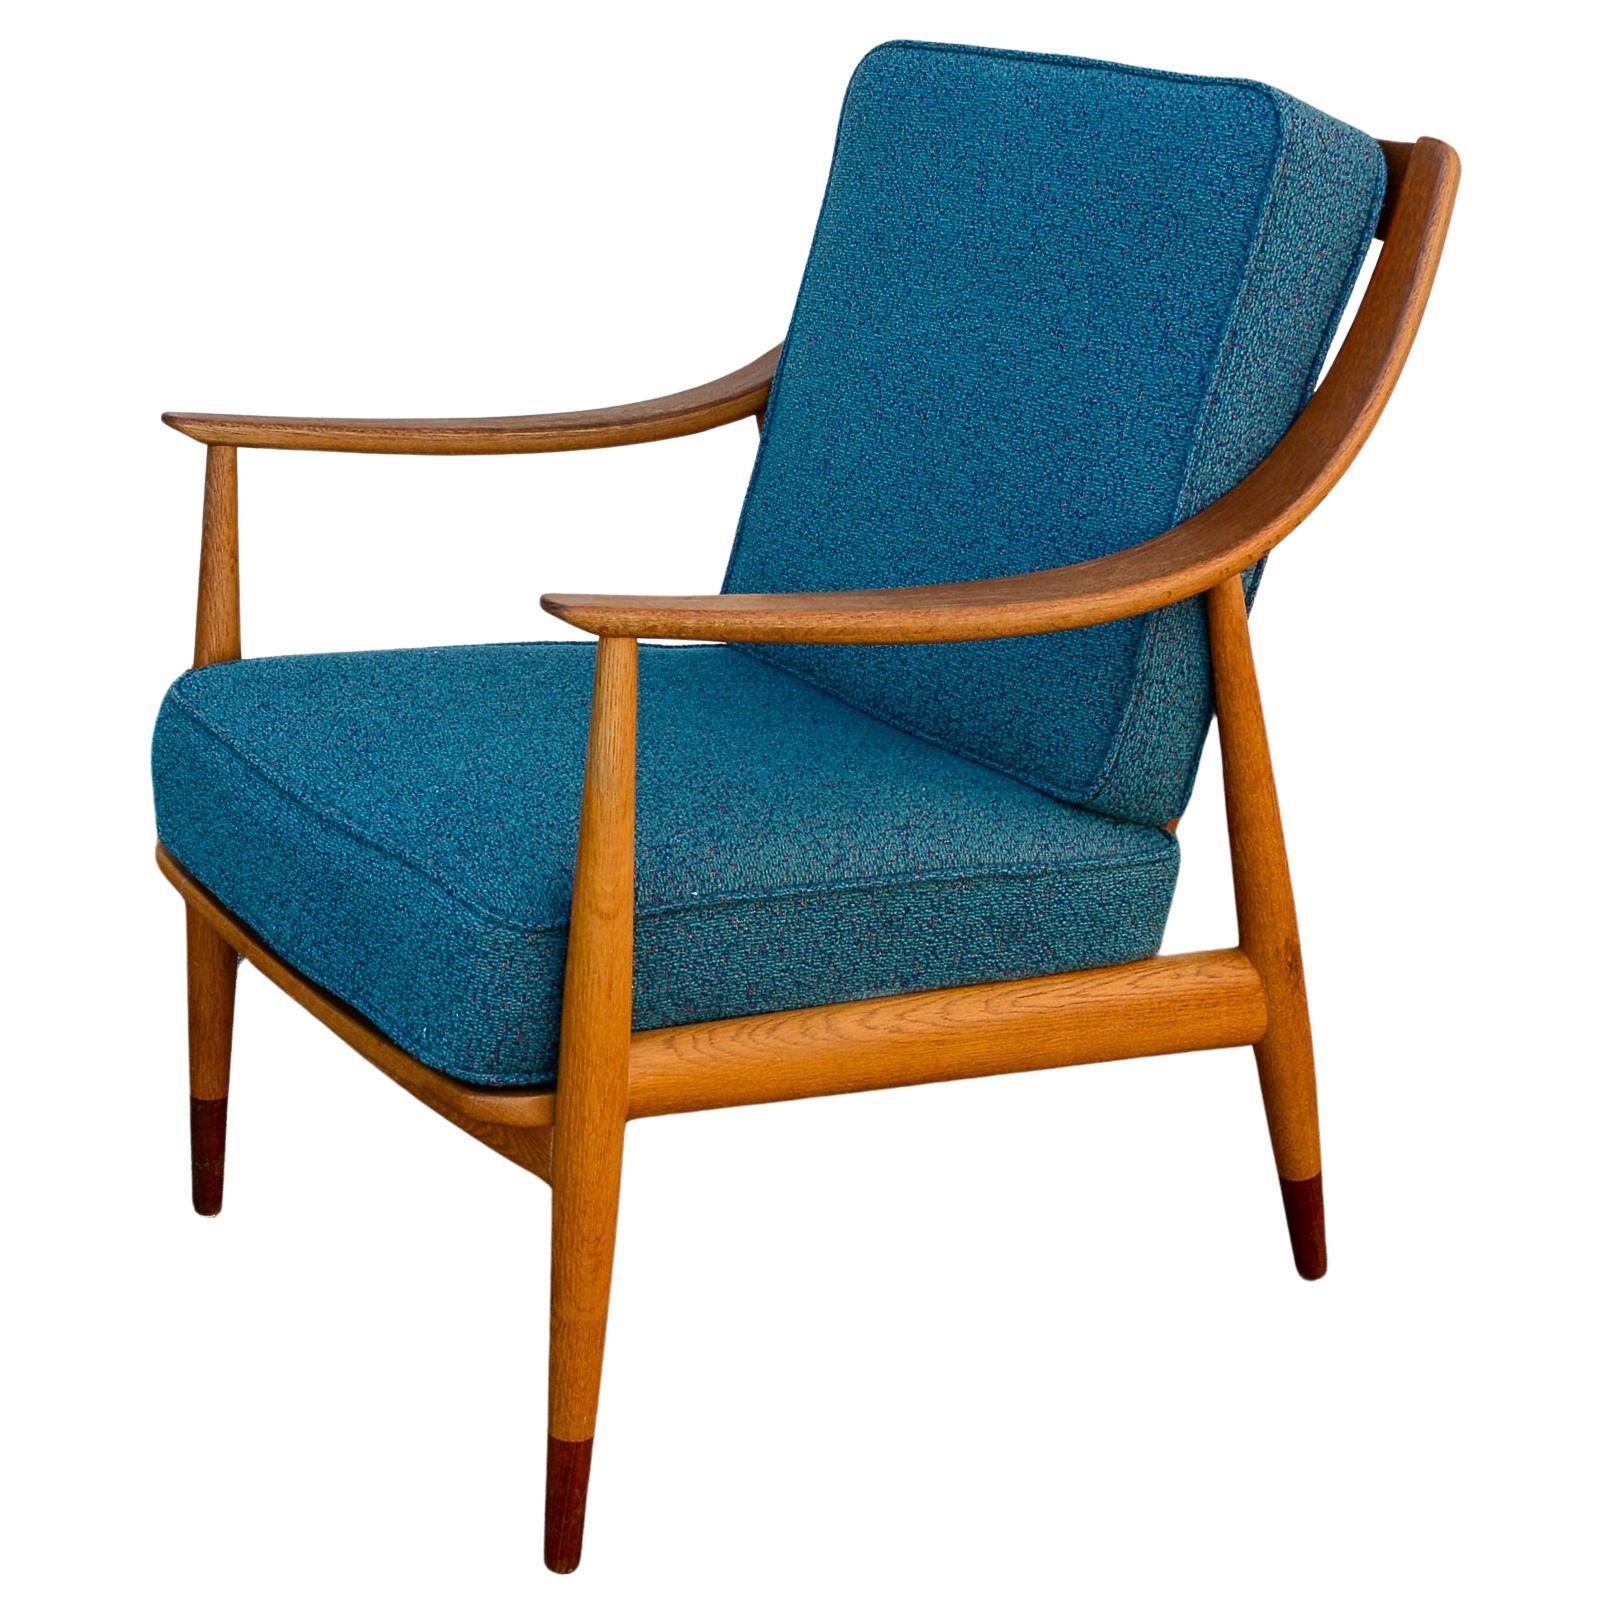 Oak and Teak Lounge Chair by Peter Hvidt and Orla Molgaard